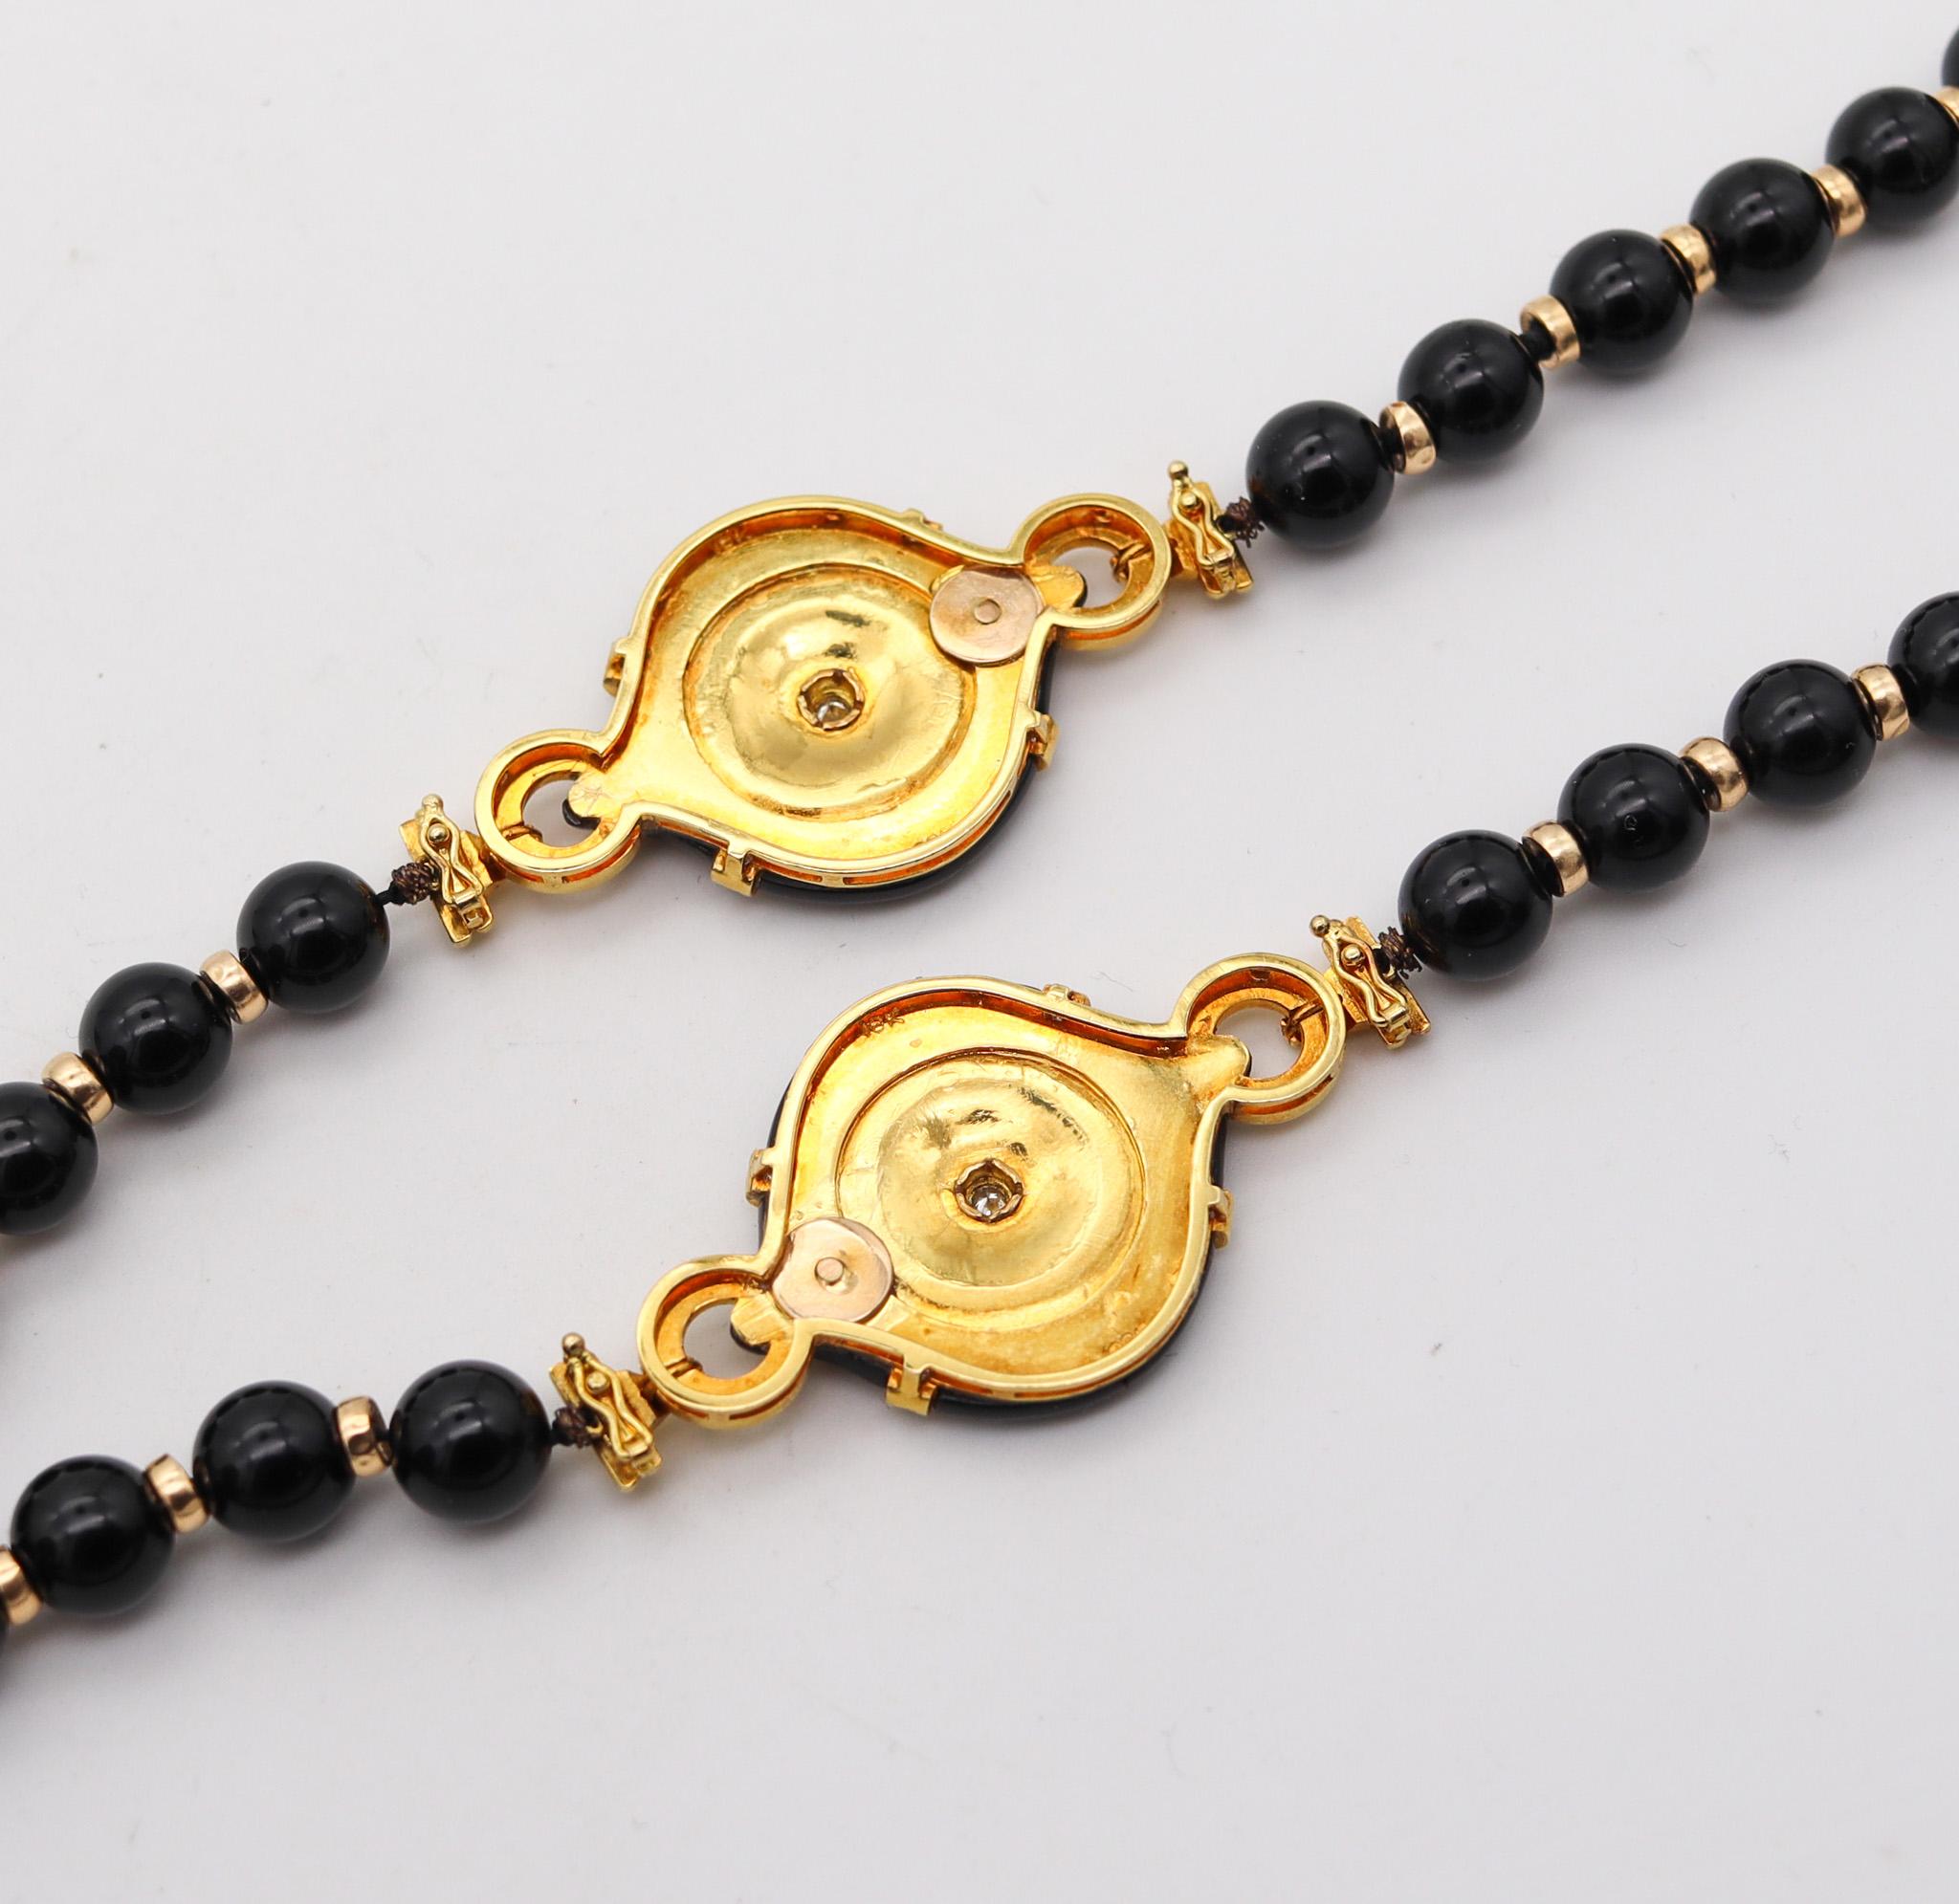 Cabochon Gumps Chinoiserie Onyx Long Necklace Sautoir In 18Kt Gold With Jade And Diamonds For Sale